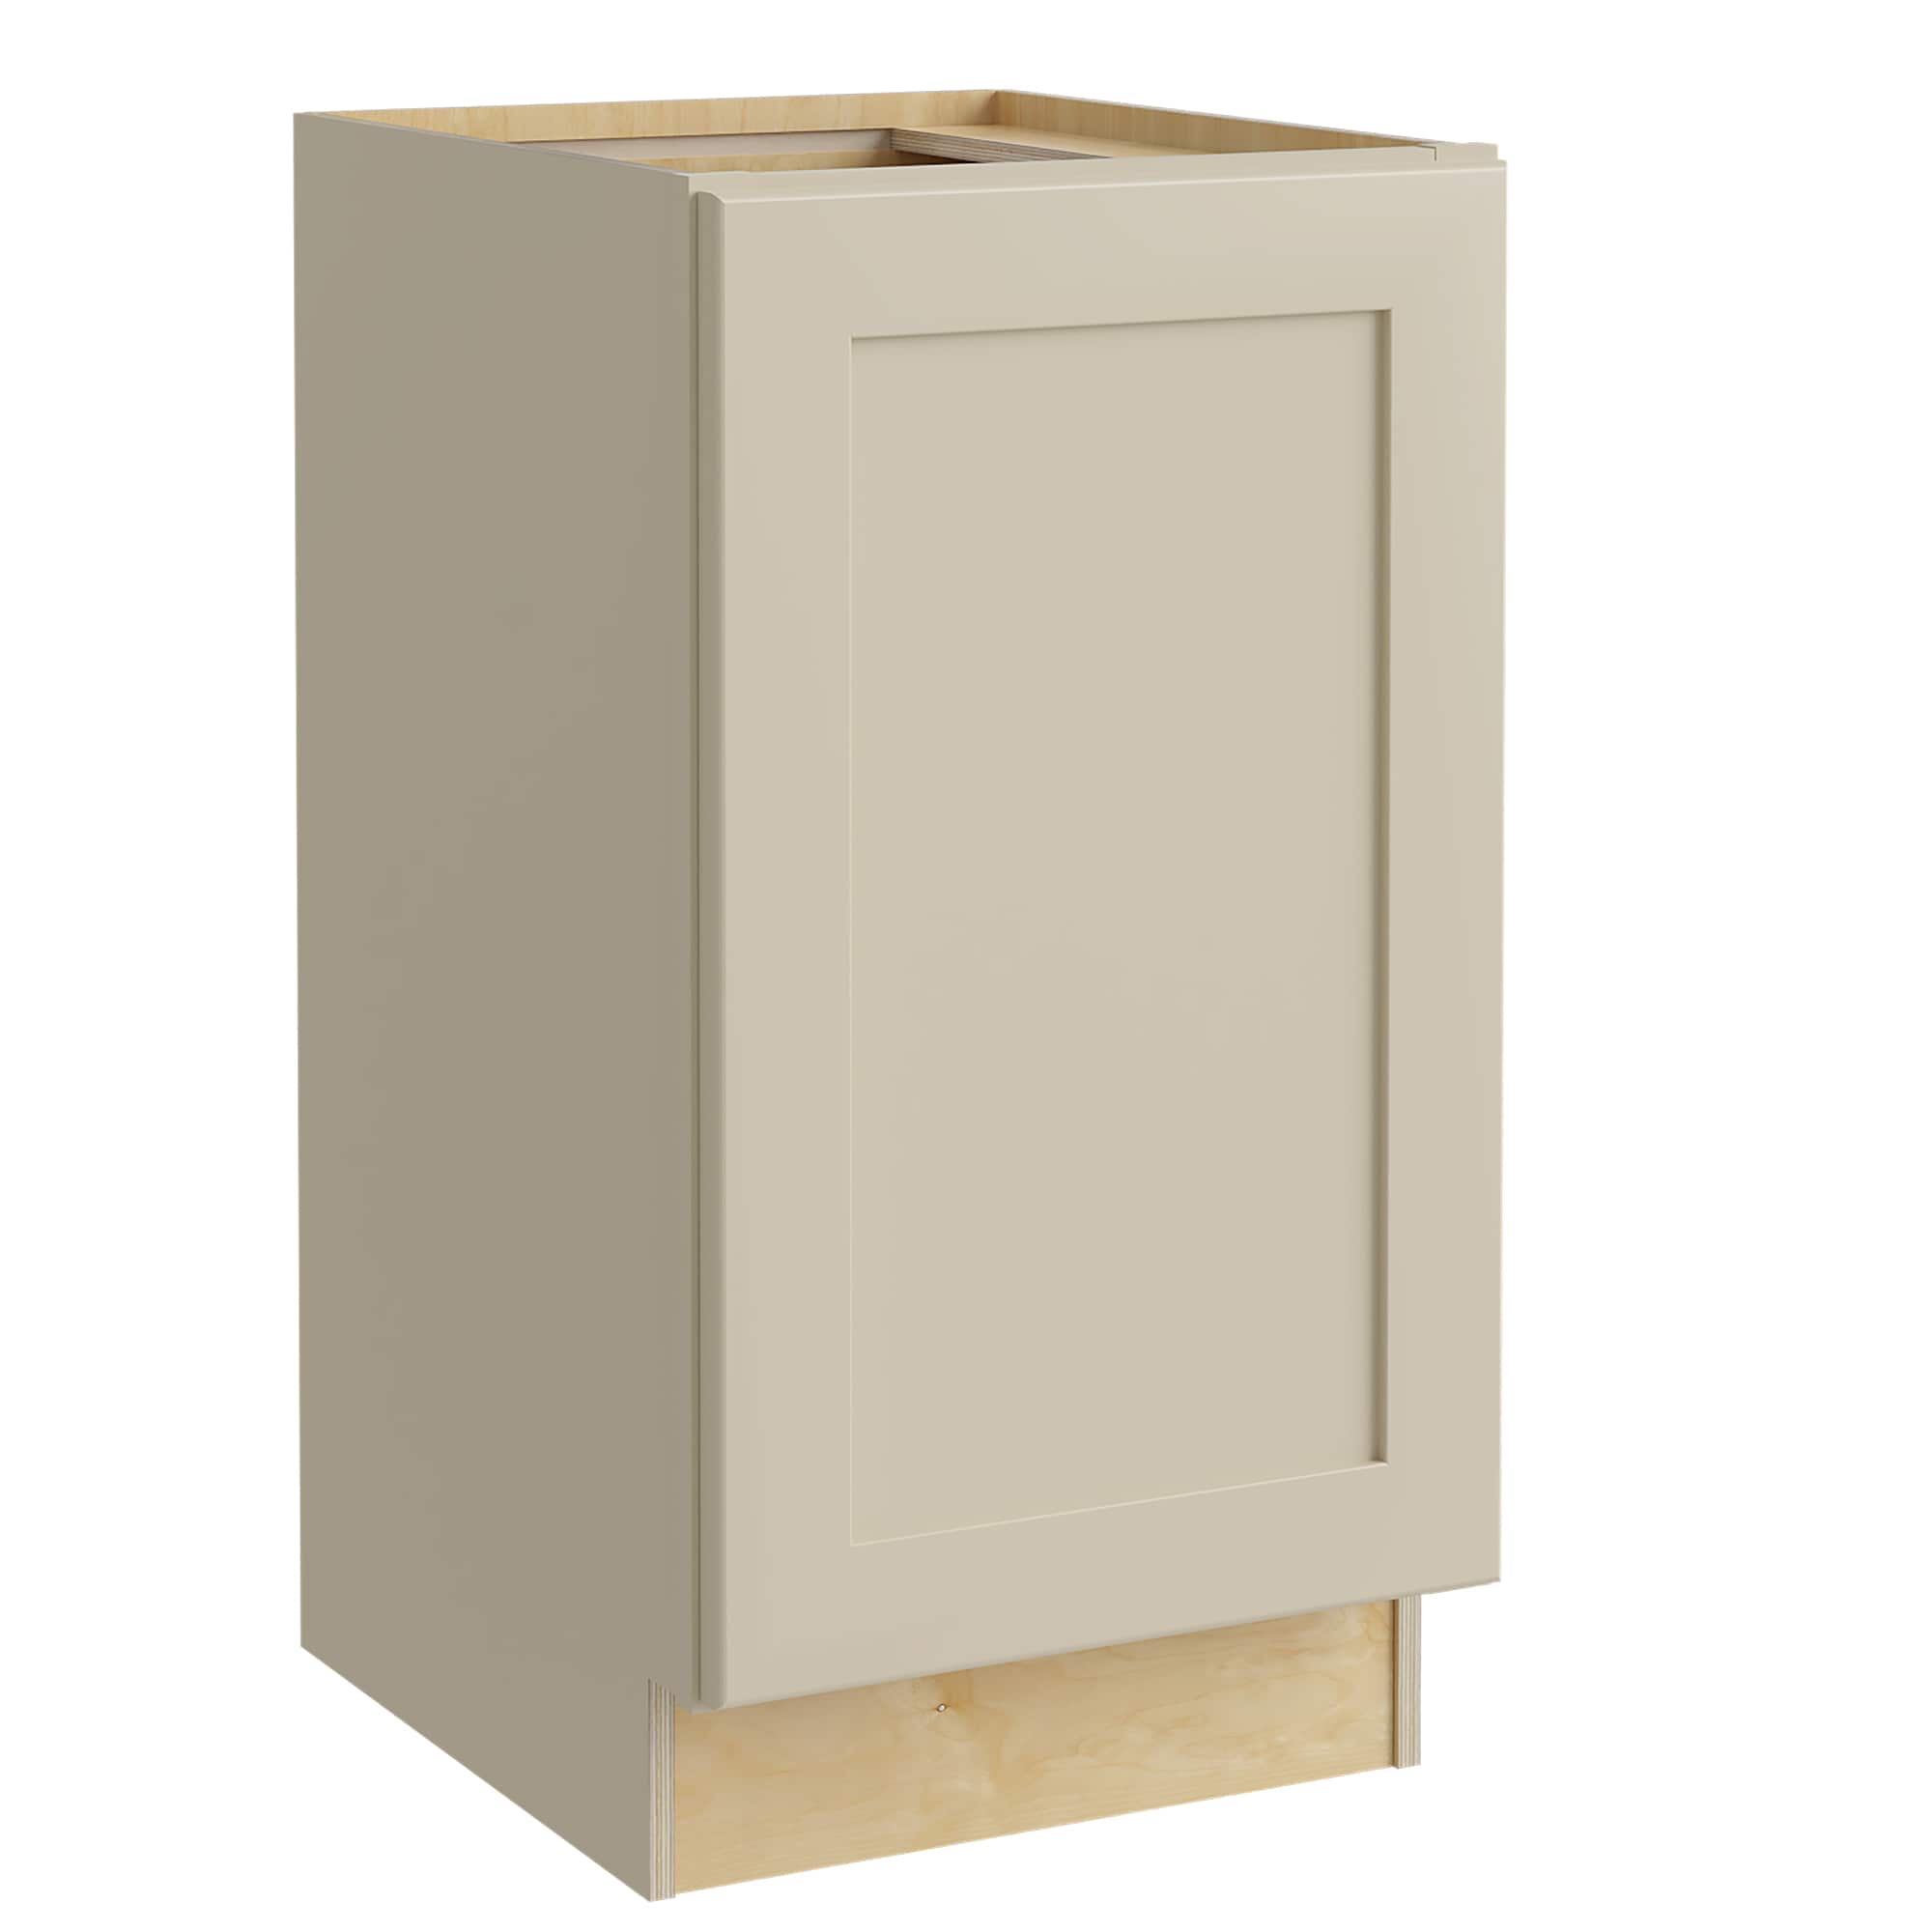 Luxxe Cabinetry 18-in W x 34.5-in H x 24-in D Norfolk Blended Cream Painted Door Base Fully Assembled Semi-custom Cabinet in Off-White | B18FHR-NBC